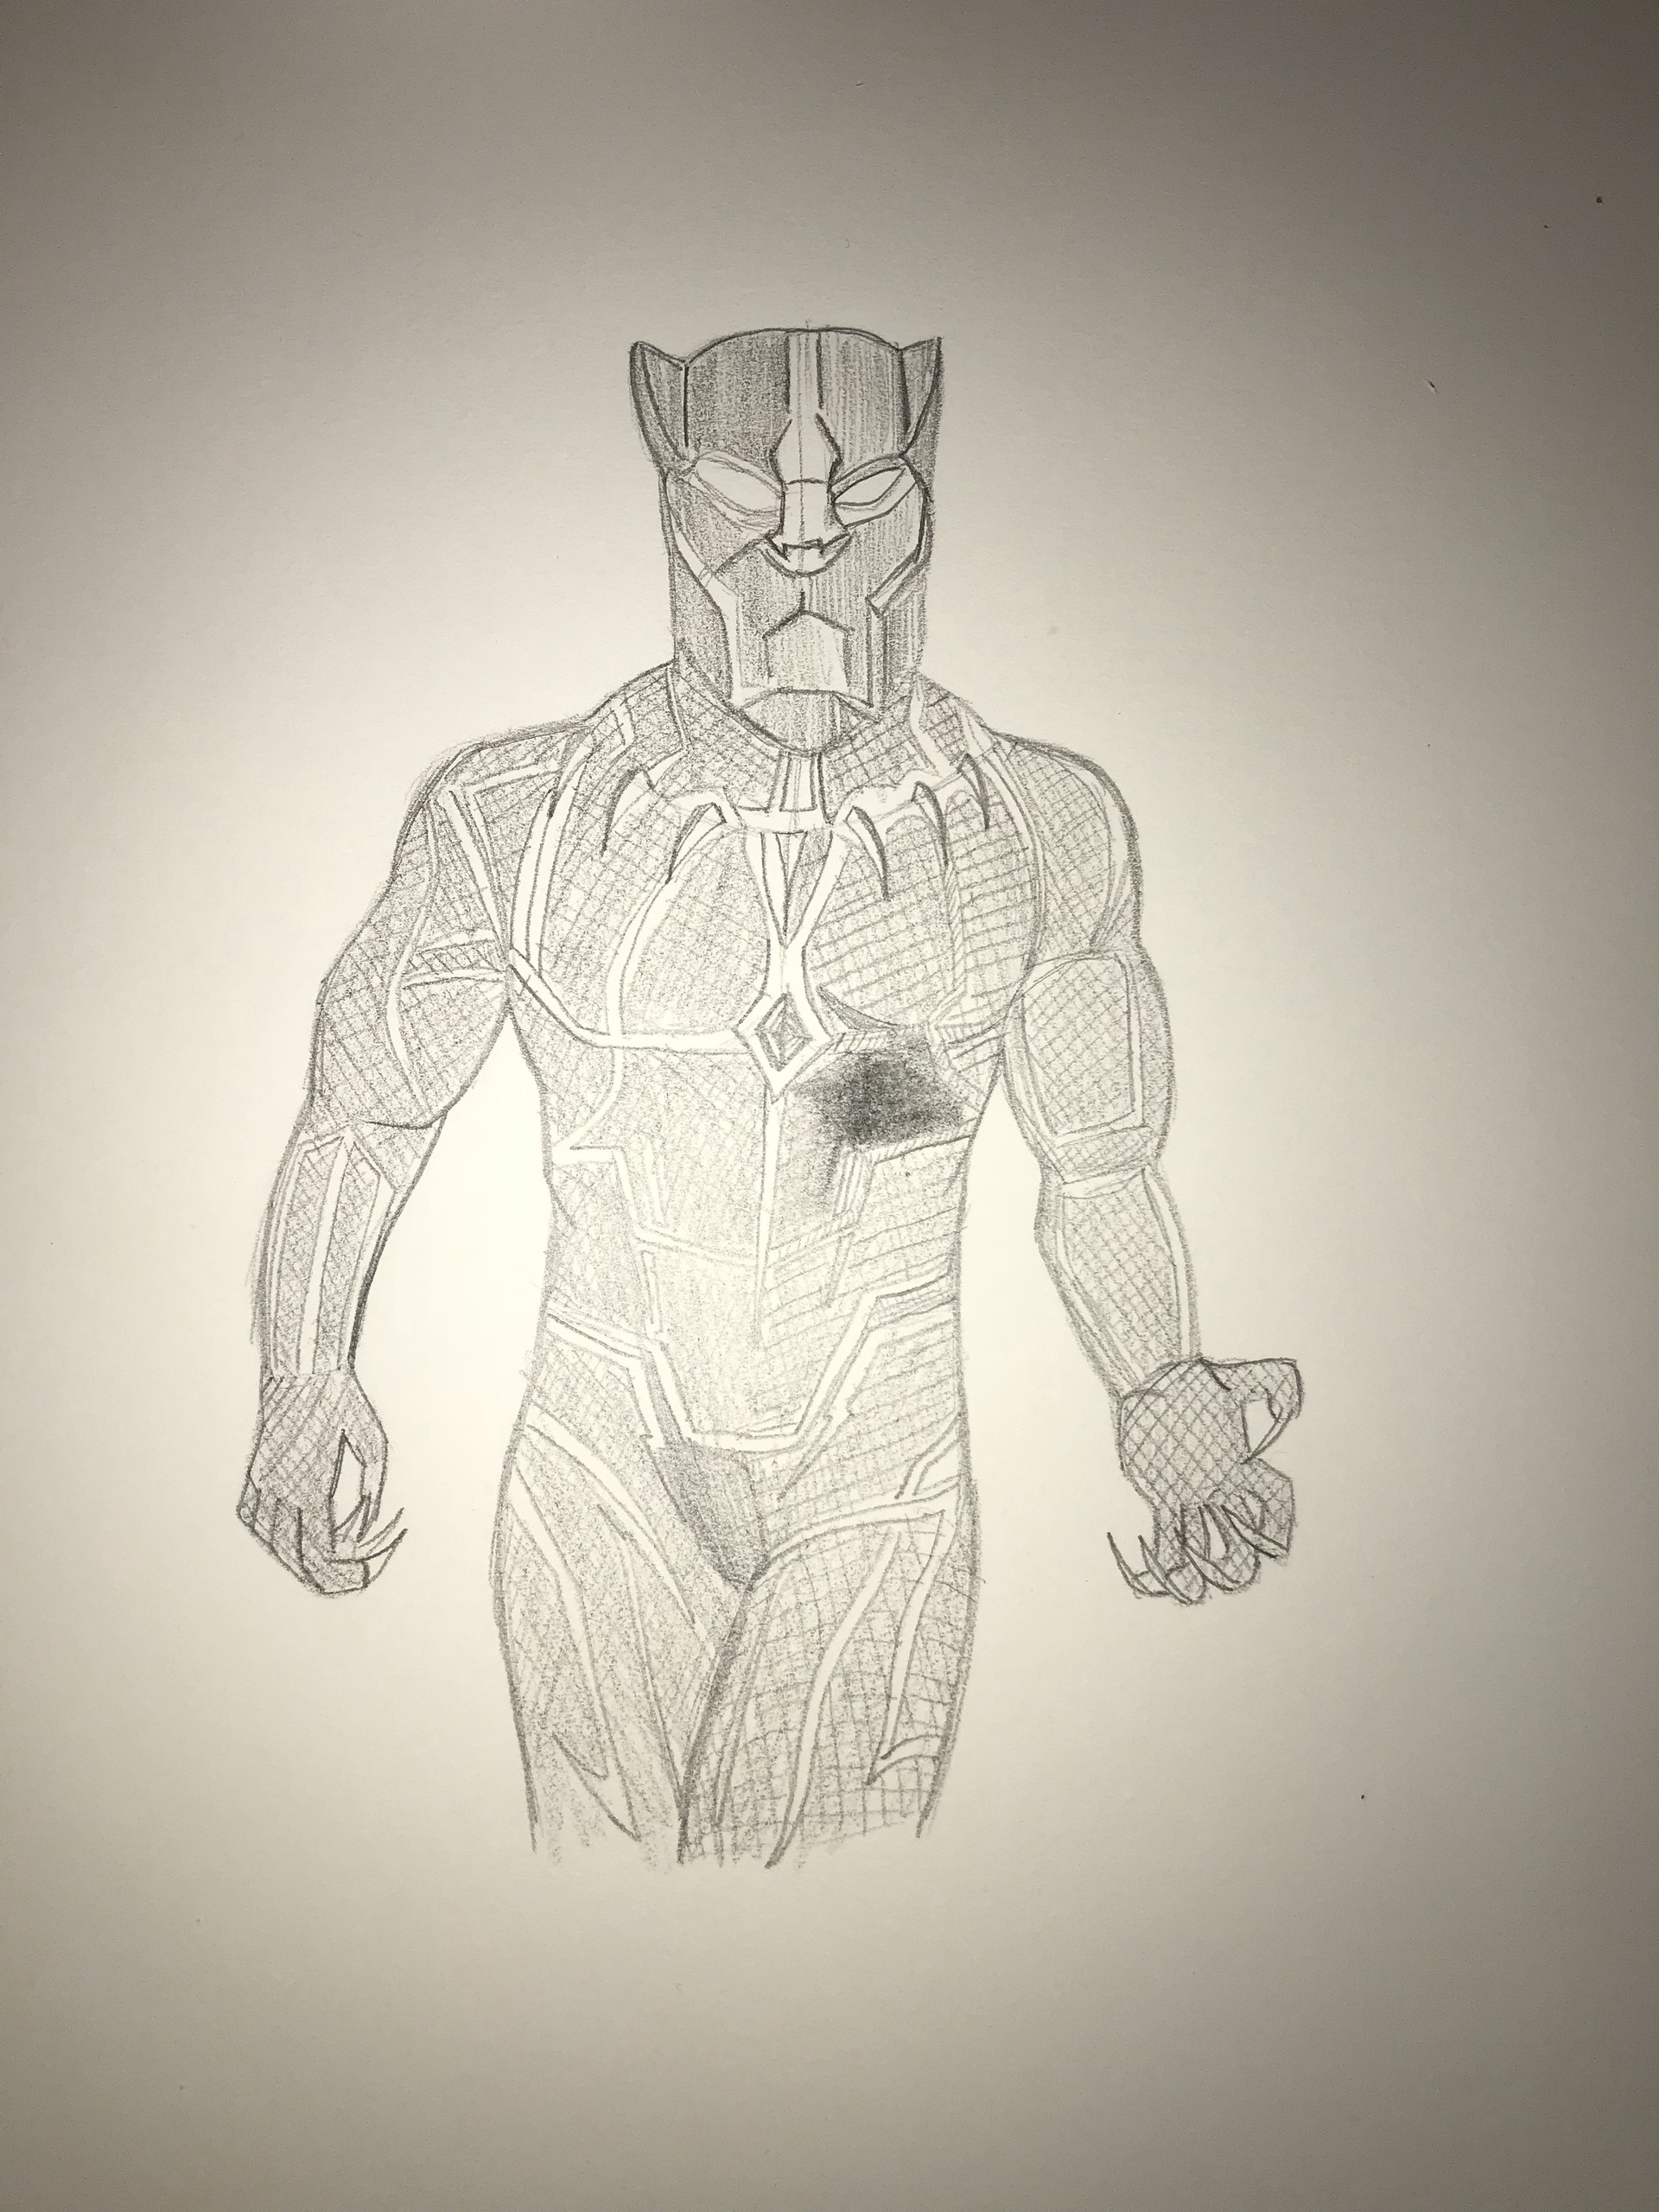 Black Panther sketch by LucianoVecchio on DeviantArt